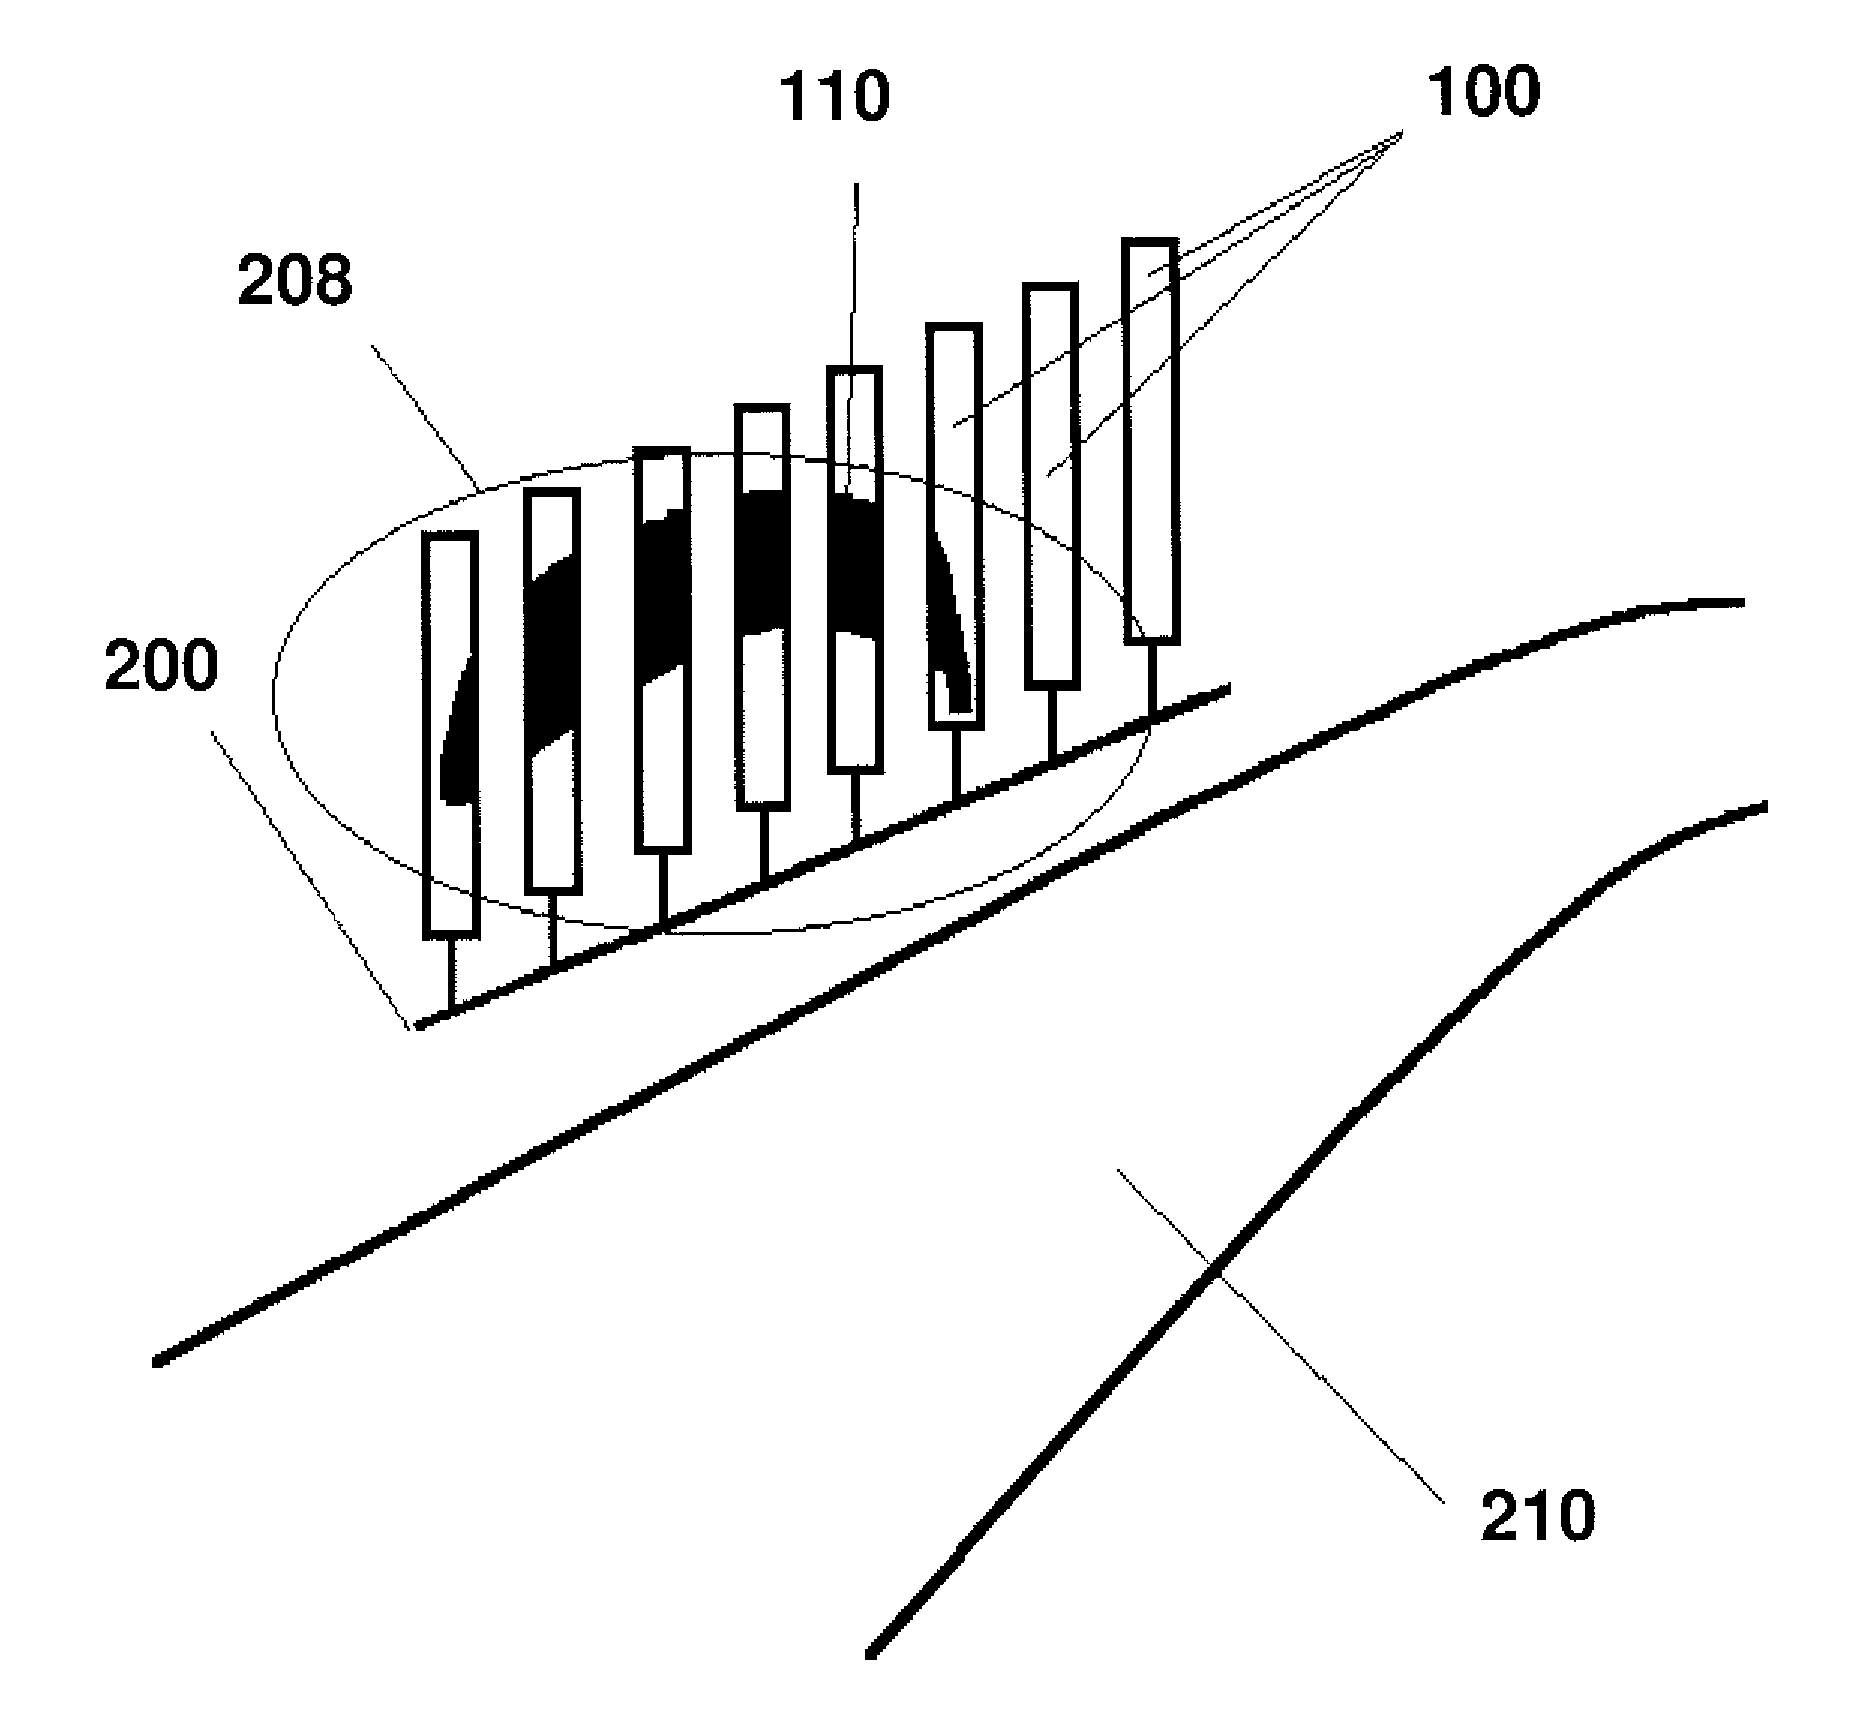 Visual elements array information display and road safety system